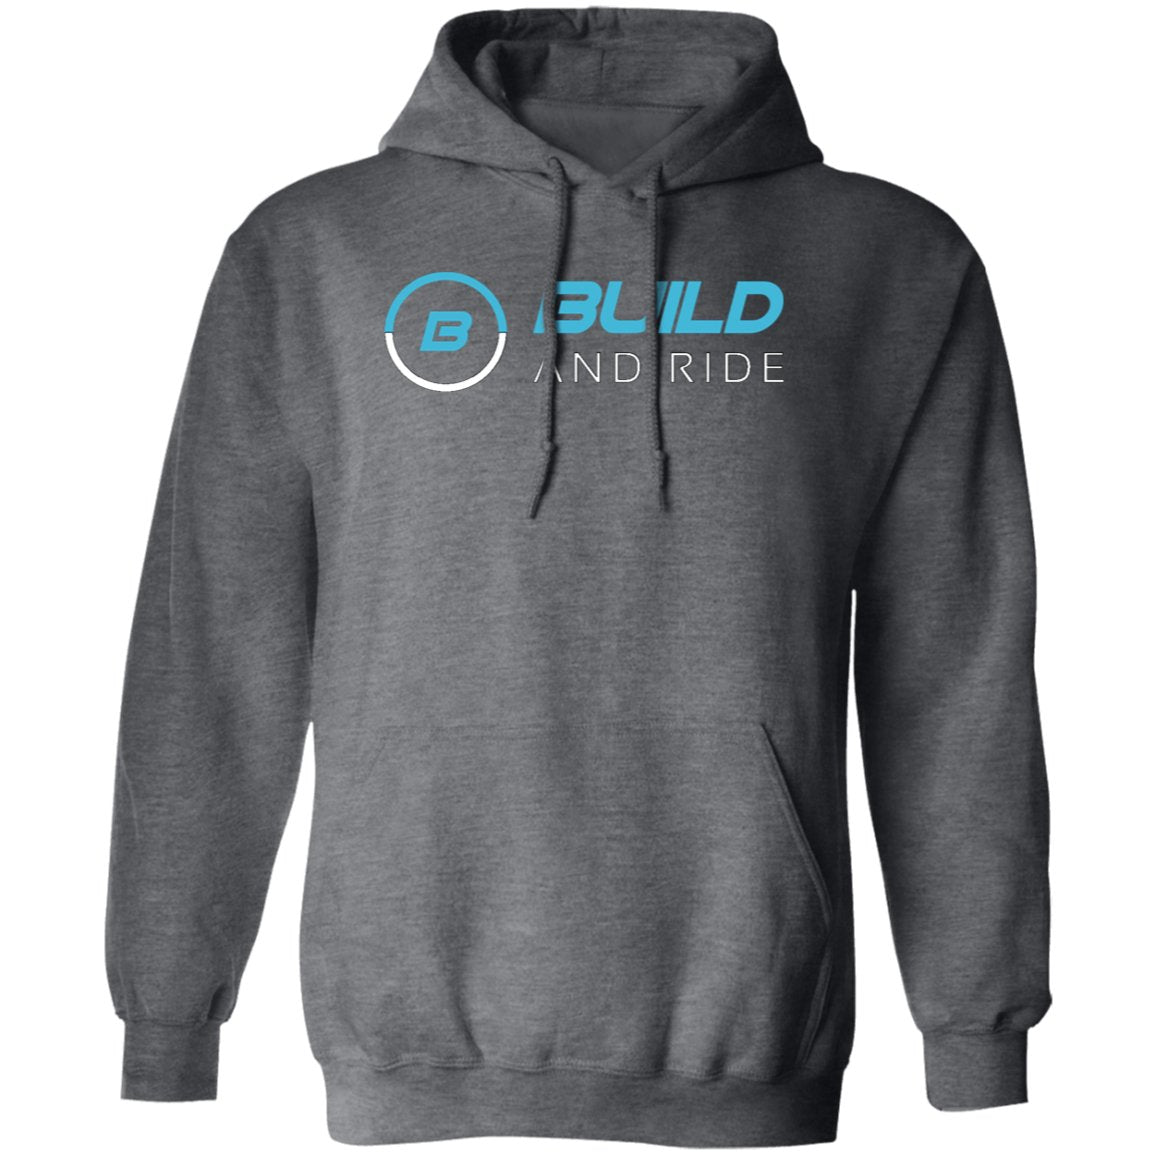 Build And Ride 2 Hoodie - Build And Ride